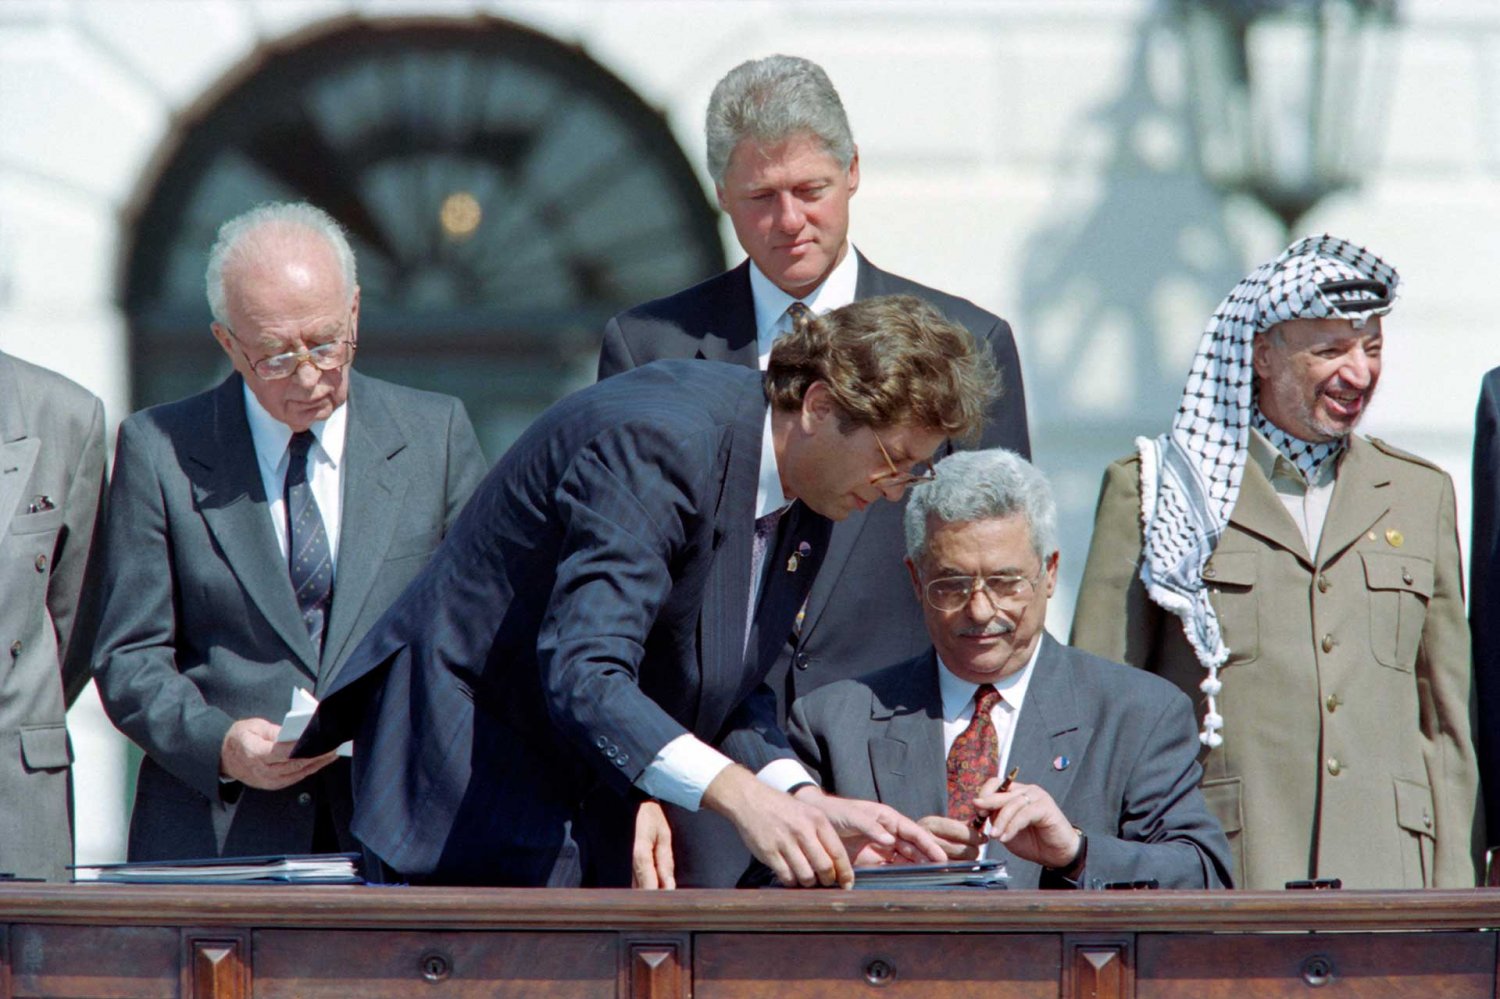 Mahmoud Abbas signs the Oslo 1 Accord (Declaration of Principles) in Washington DC for the PLO, September 13, 1993.